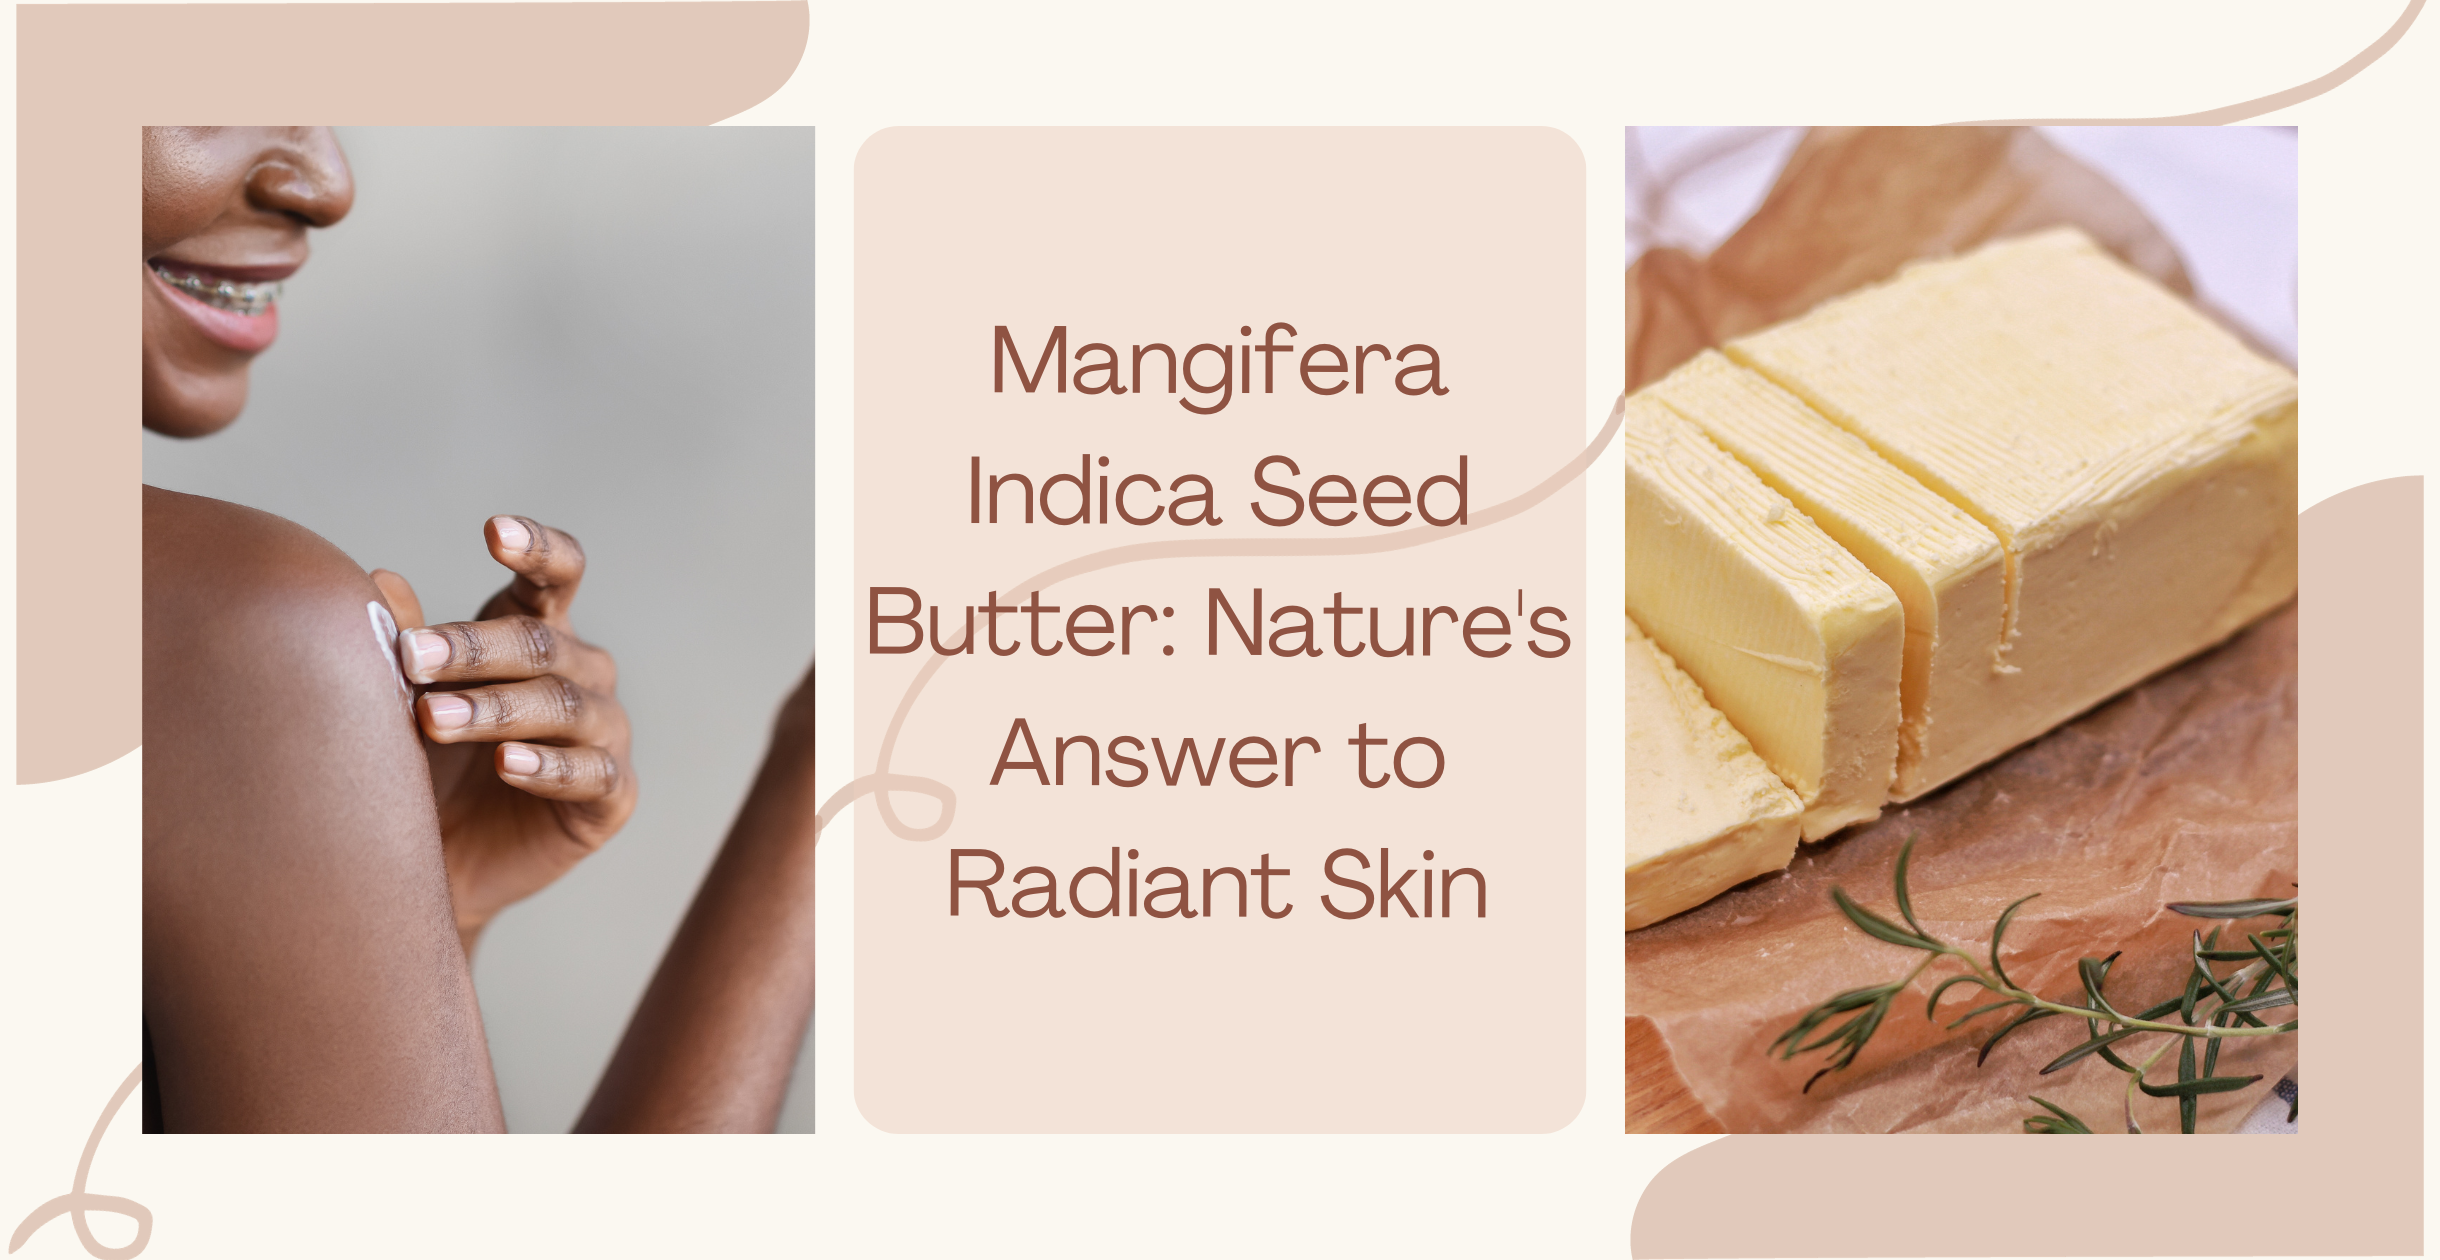 Mangifera Indica Seed Butter: Nature's Answer to Radiant Skin